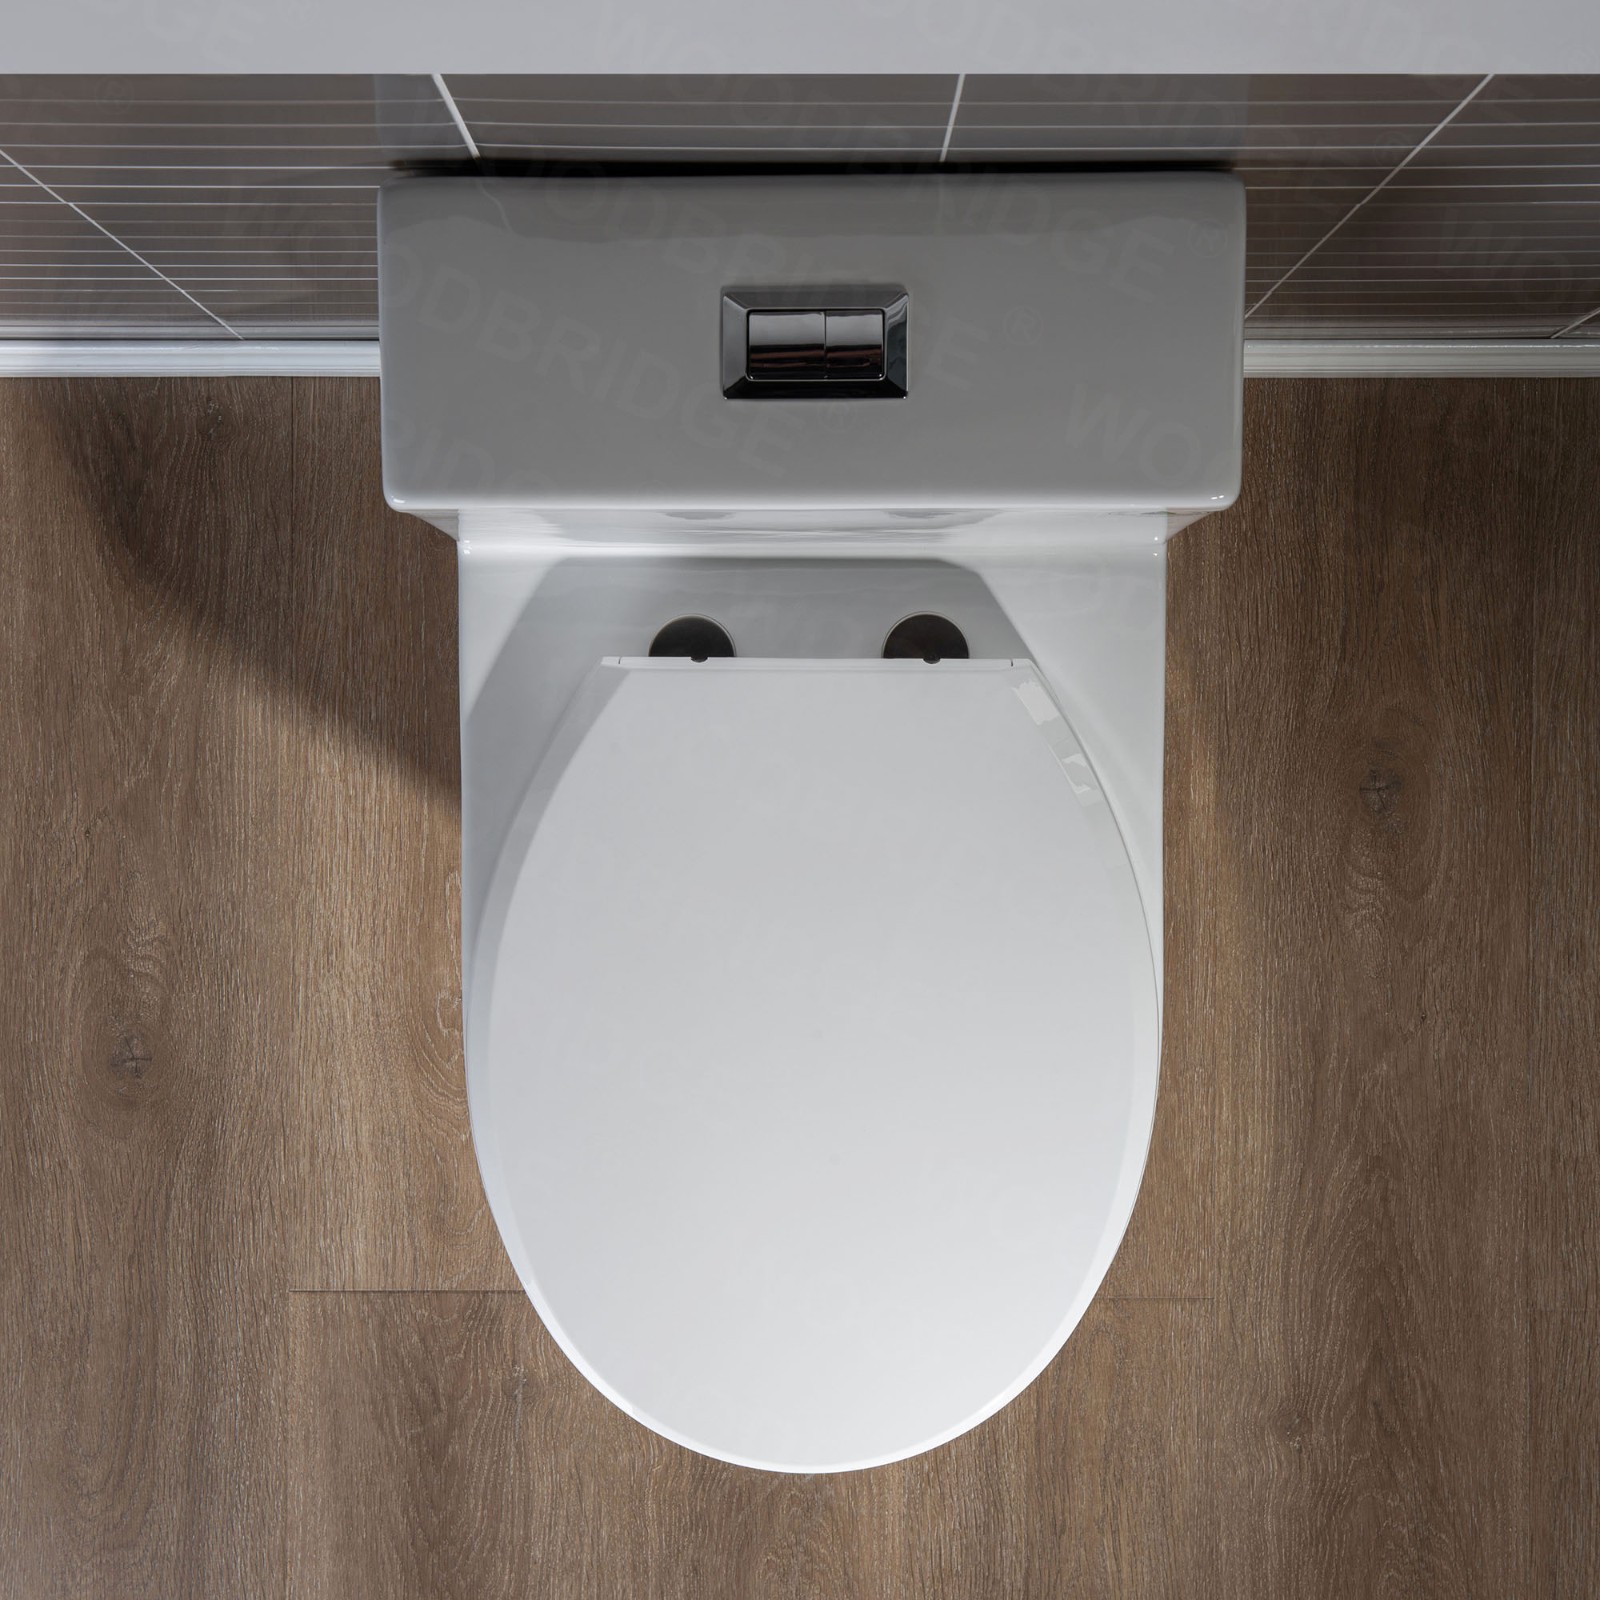  WOODBRIDGEBath T-0031 WOODBRIDGE T-0031 Short Compact Tiny One Piece Toilet with Soft Closing Seat, Small Toilet(2 -Pack)_6498